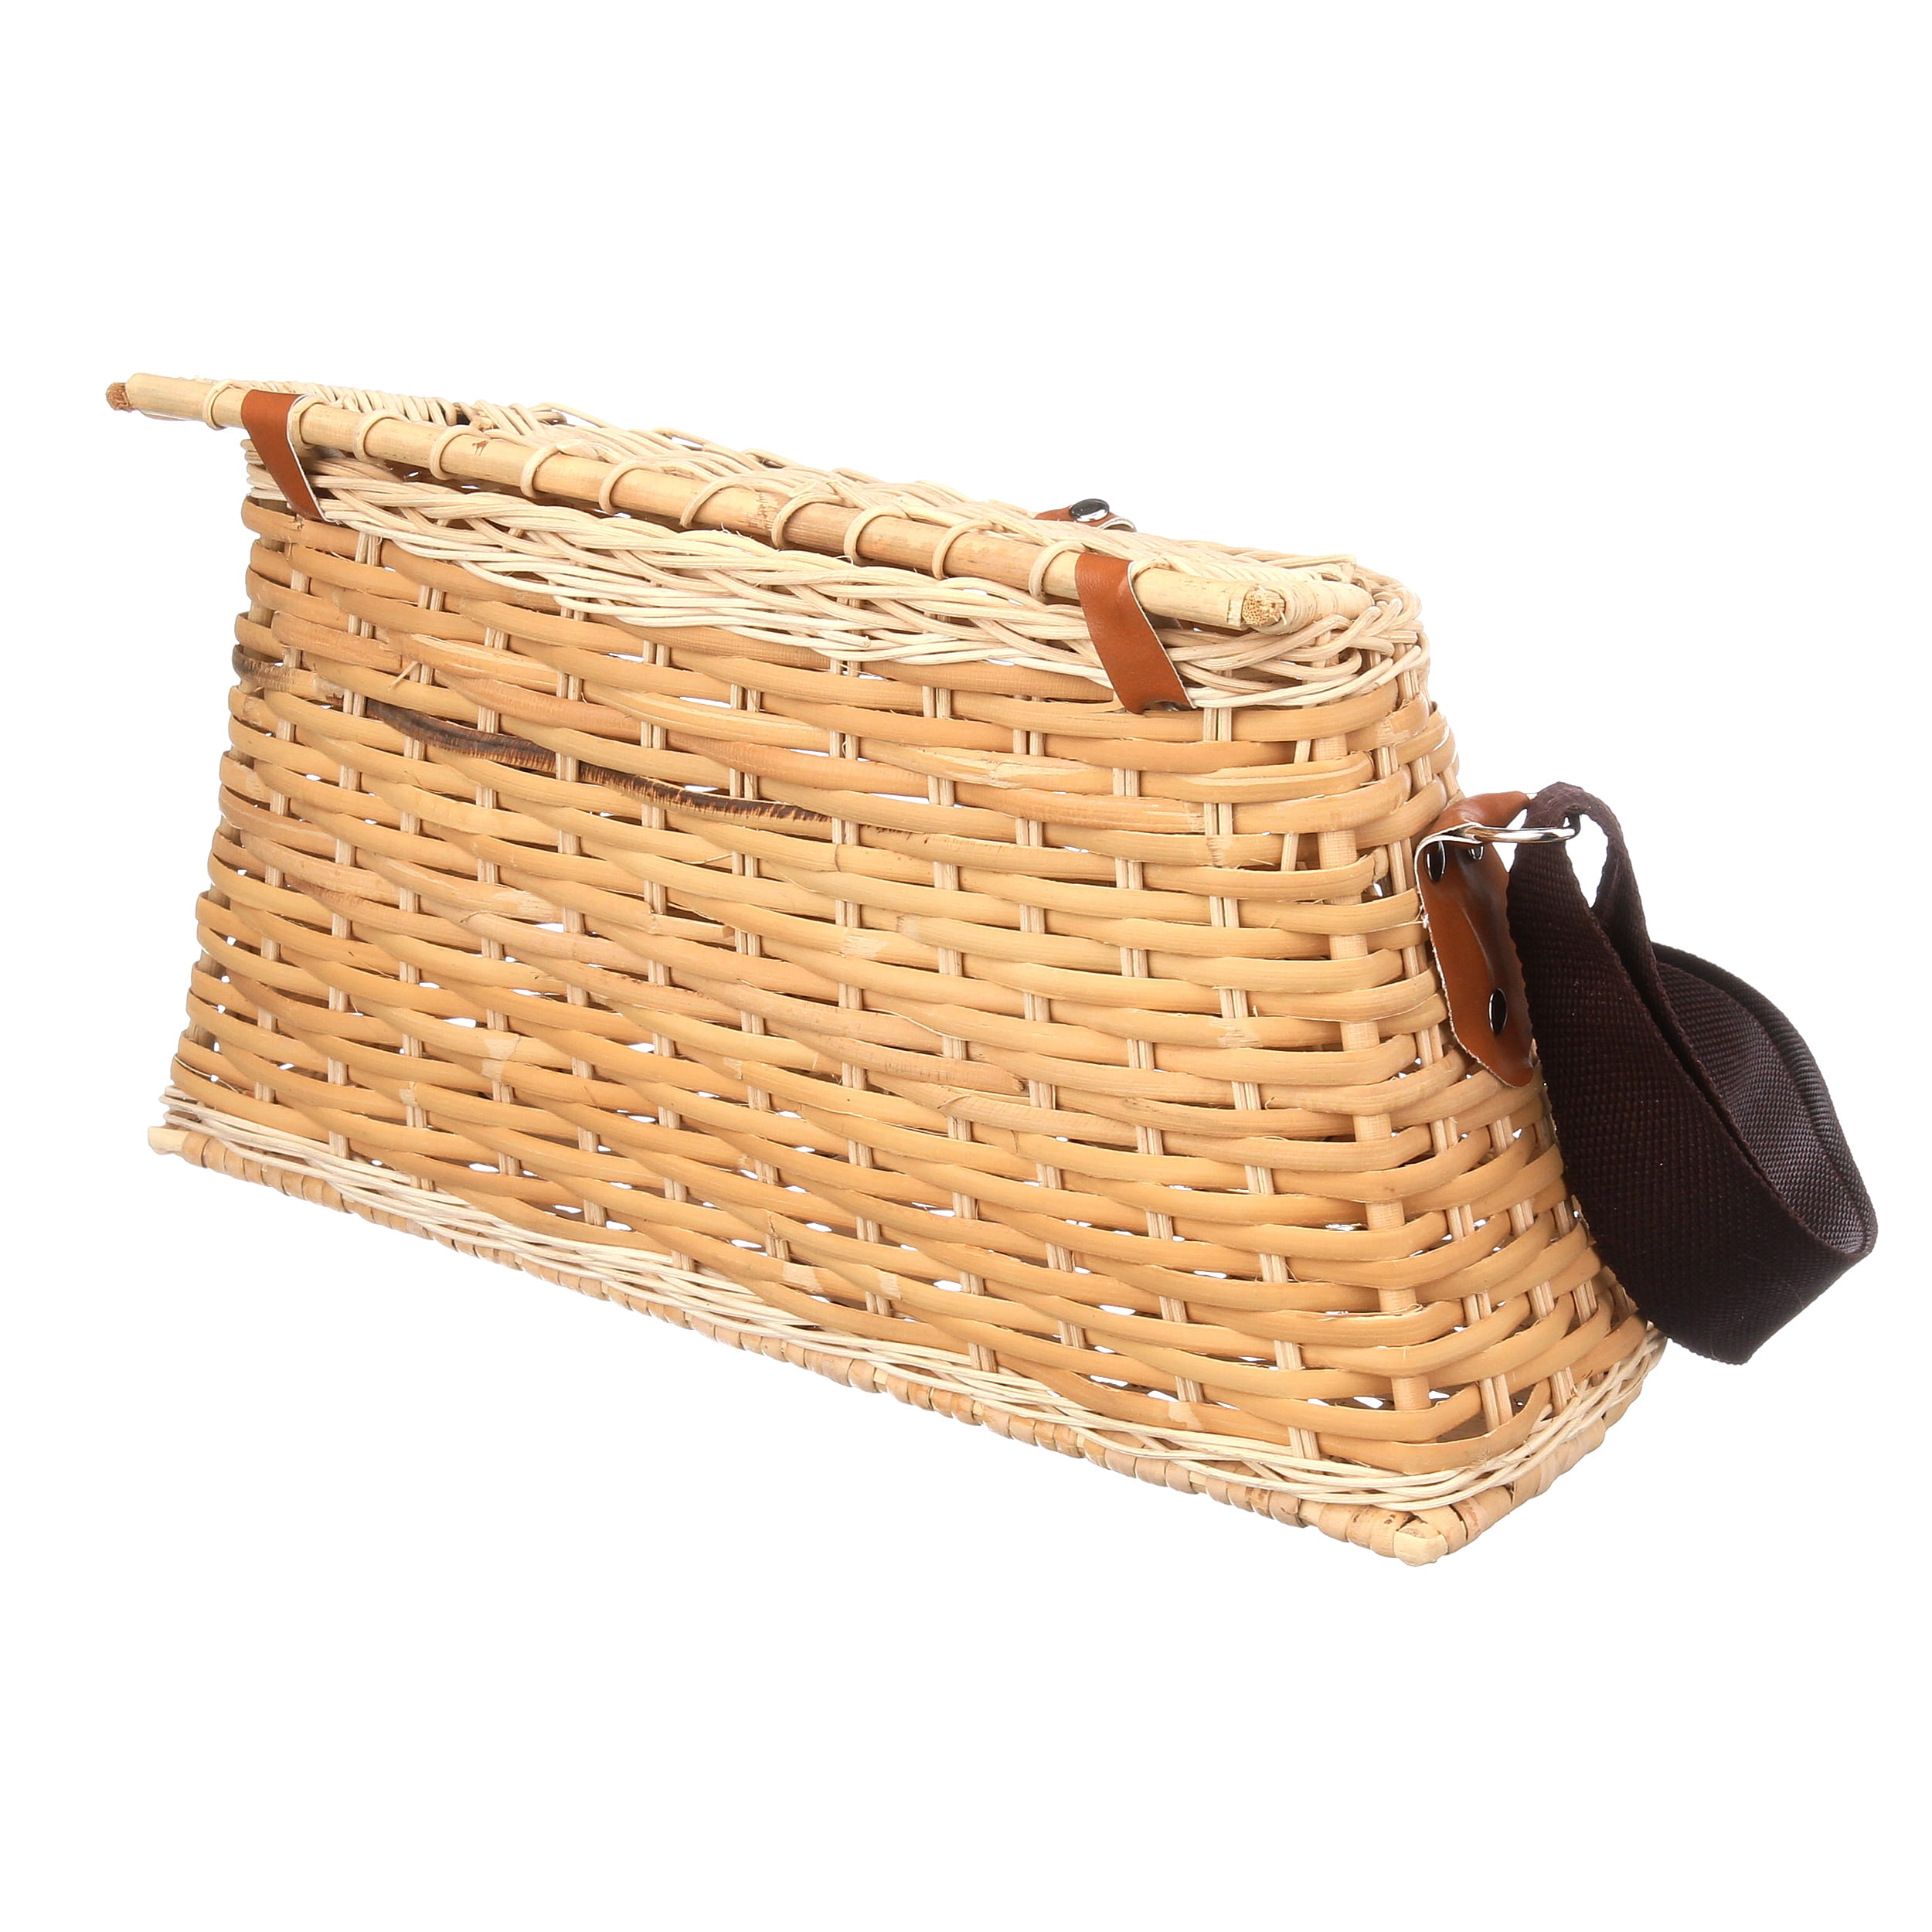 Extra Cute Small Sized Vintage Classic Fisherman's Rattan Fishing Creel  Basket for Carrying Your Big Catch of Fish 